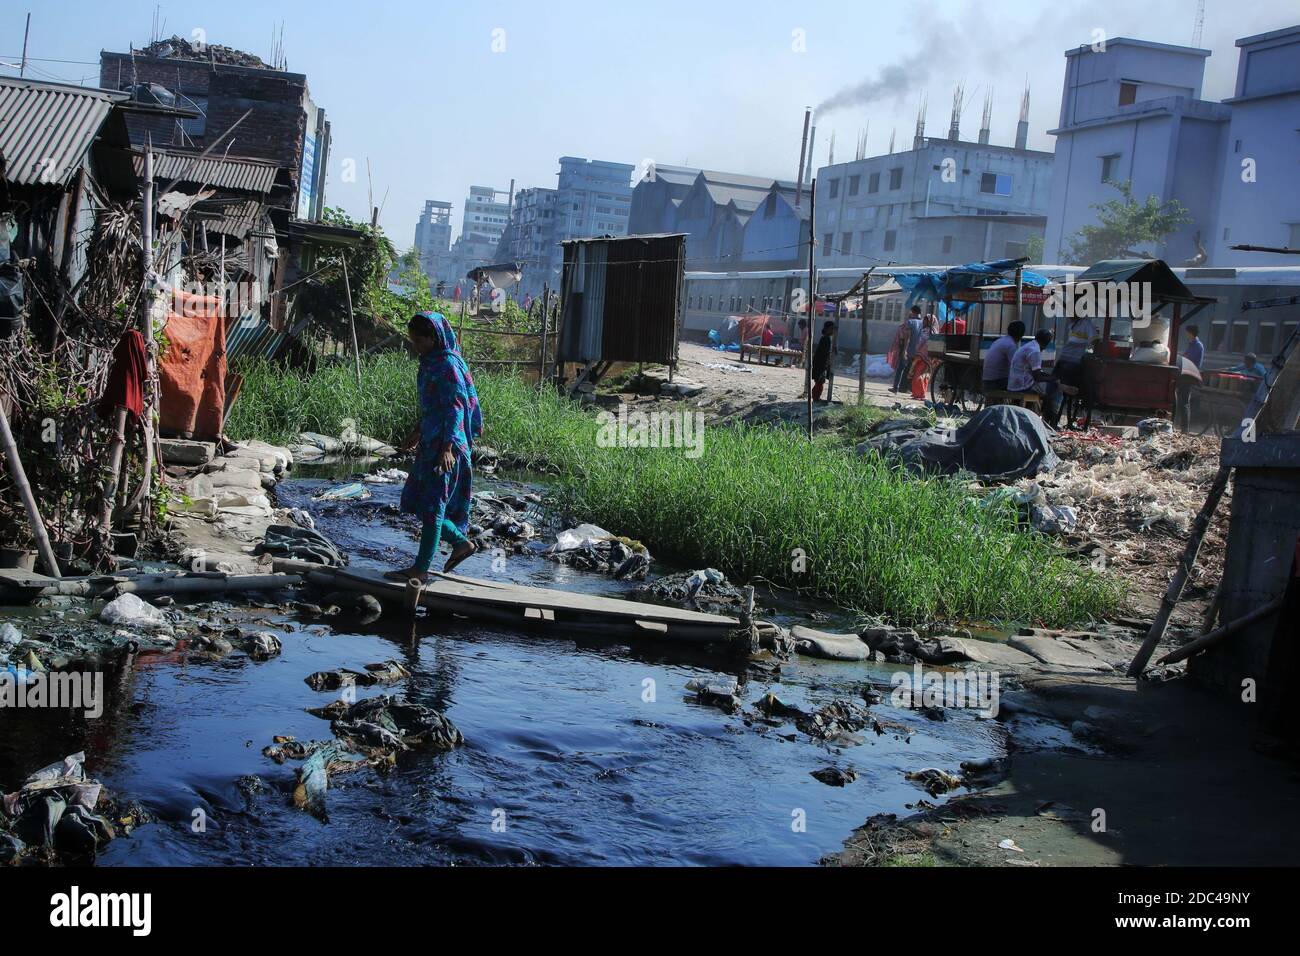 Dhaka, Bangladesh. 12th Nov, 2020. A woman seen using a wooden plank to enter her house as the road is flooded with the textile mills wastage at Shyampur industrial area in Dhaka.Most people in this area have become victims of pollution due to the presence of toxic chemicals, mainly dyeing chemical. Due to unplanned sewerage system of textile mills, residents of this area suffering for a long time. Credit: Sultan Mahmud Mukut/SOPA Images/ZUMA Wire/Alamy Live News Stock Photo